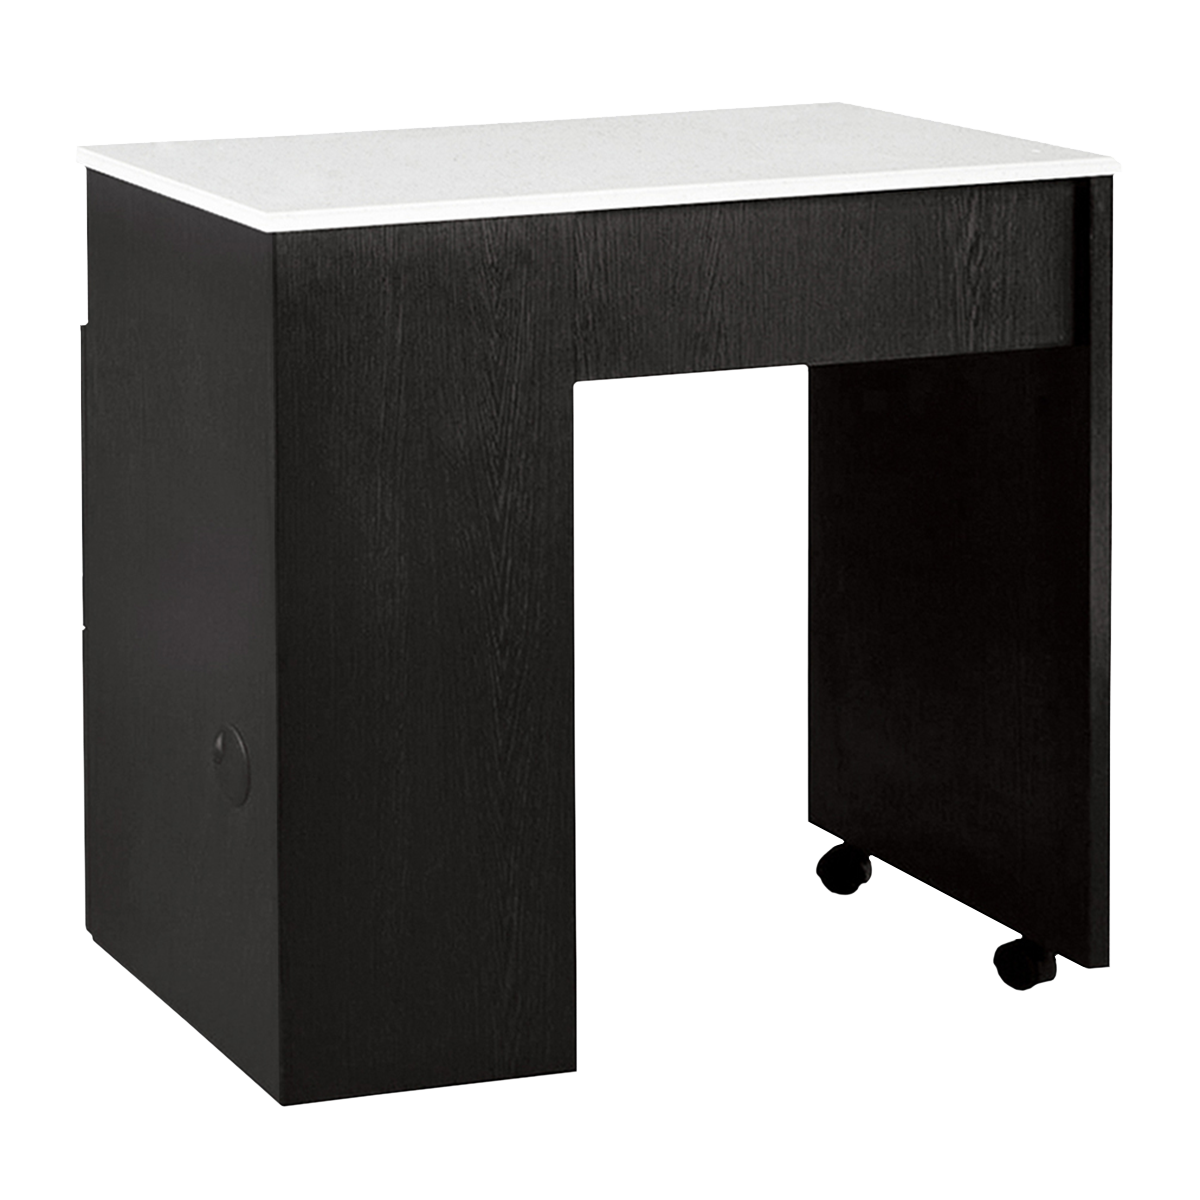 Whale Spa Black Manicure Table NM904 Nail Salon Table with Drawers, Quartz Countertop | Salon and Spa Furniture